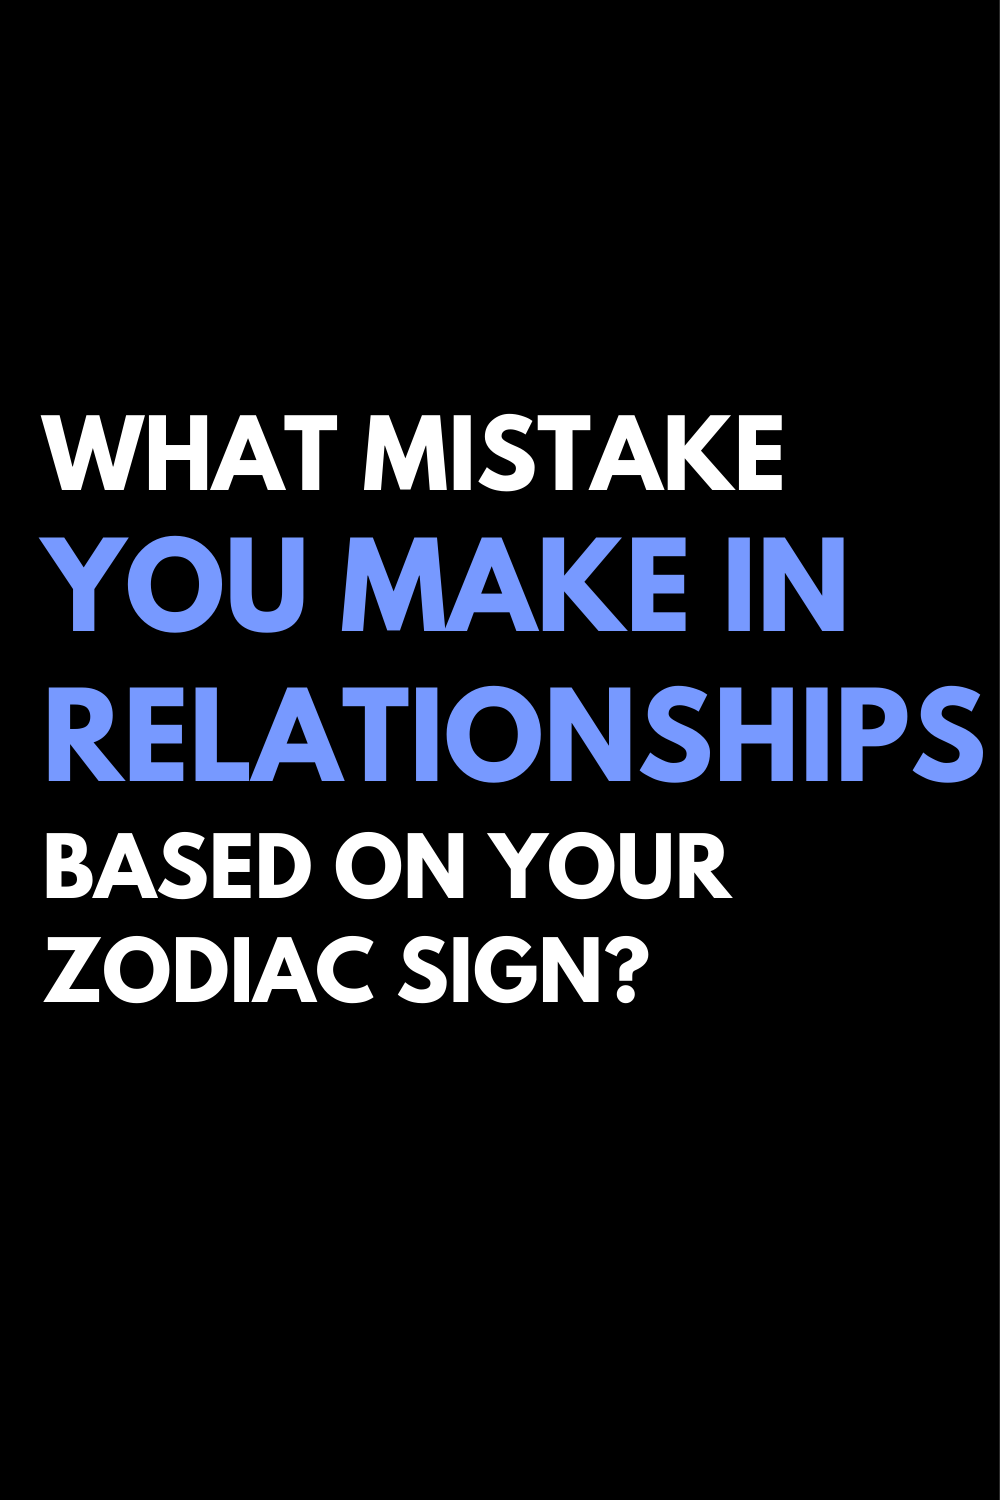 What Mistake You Make In Relationships Based On Your Zodiac Sign?